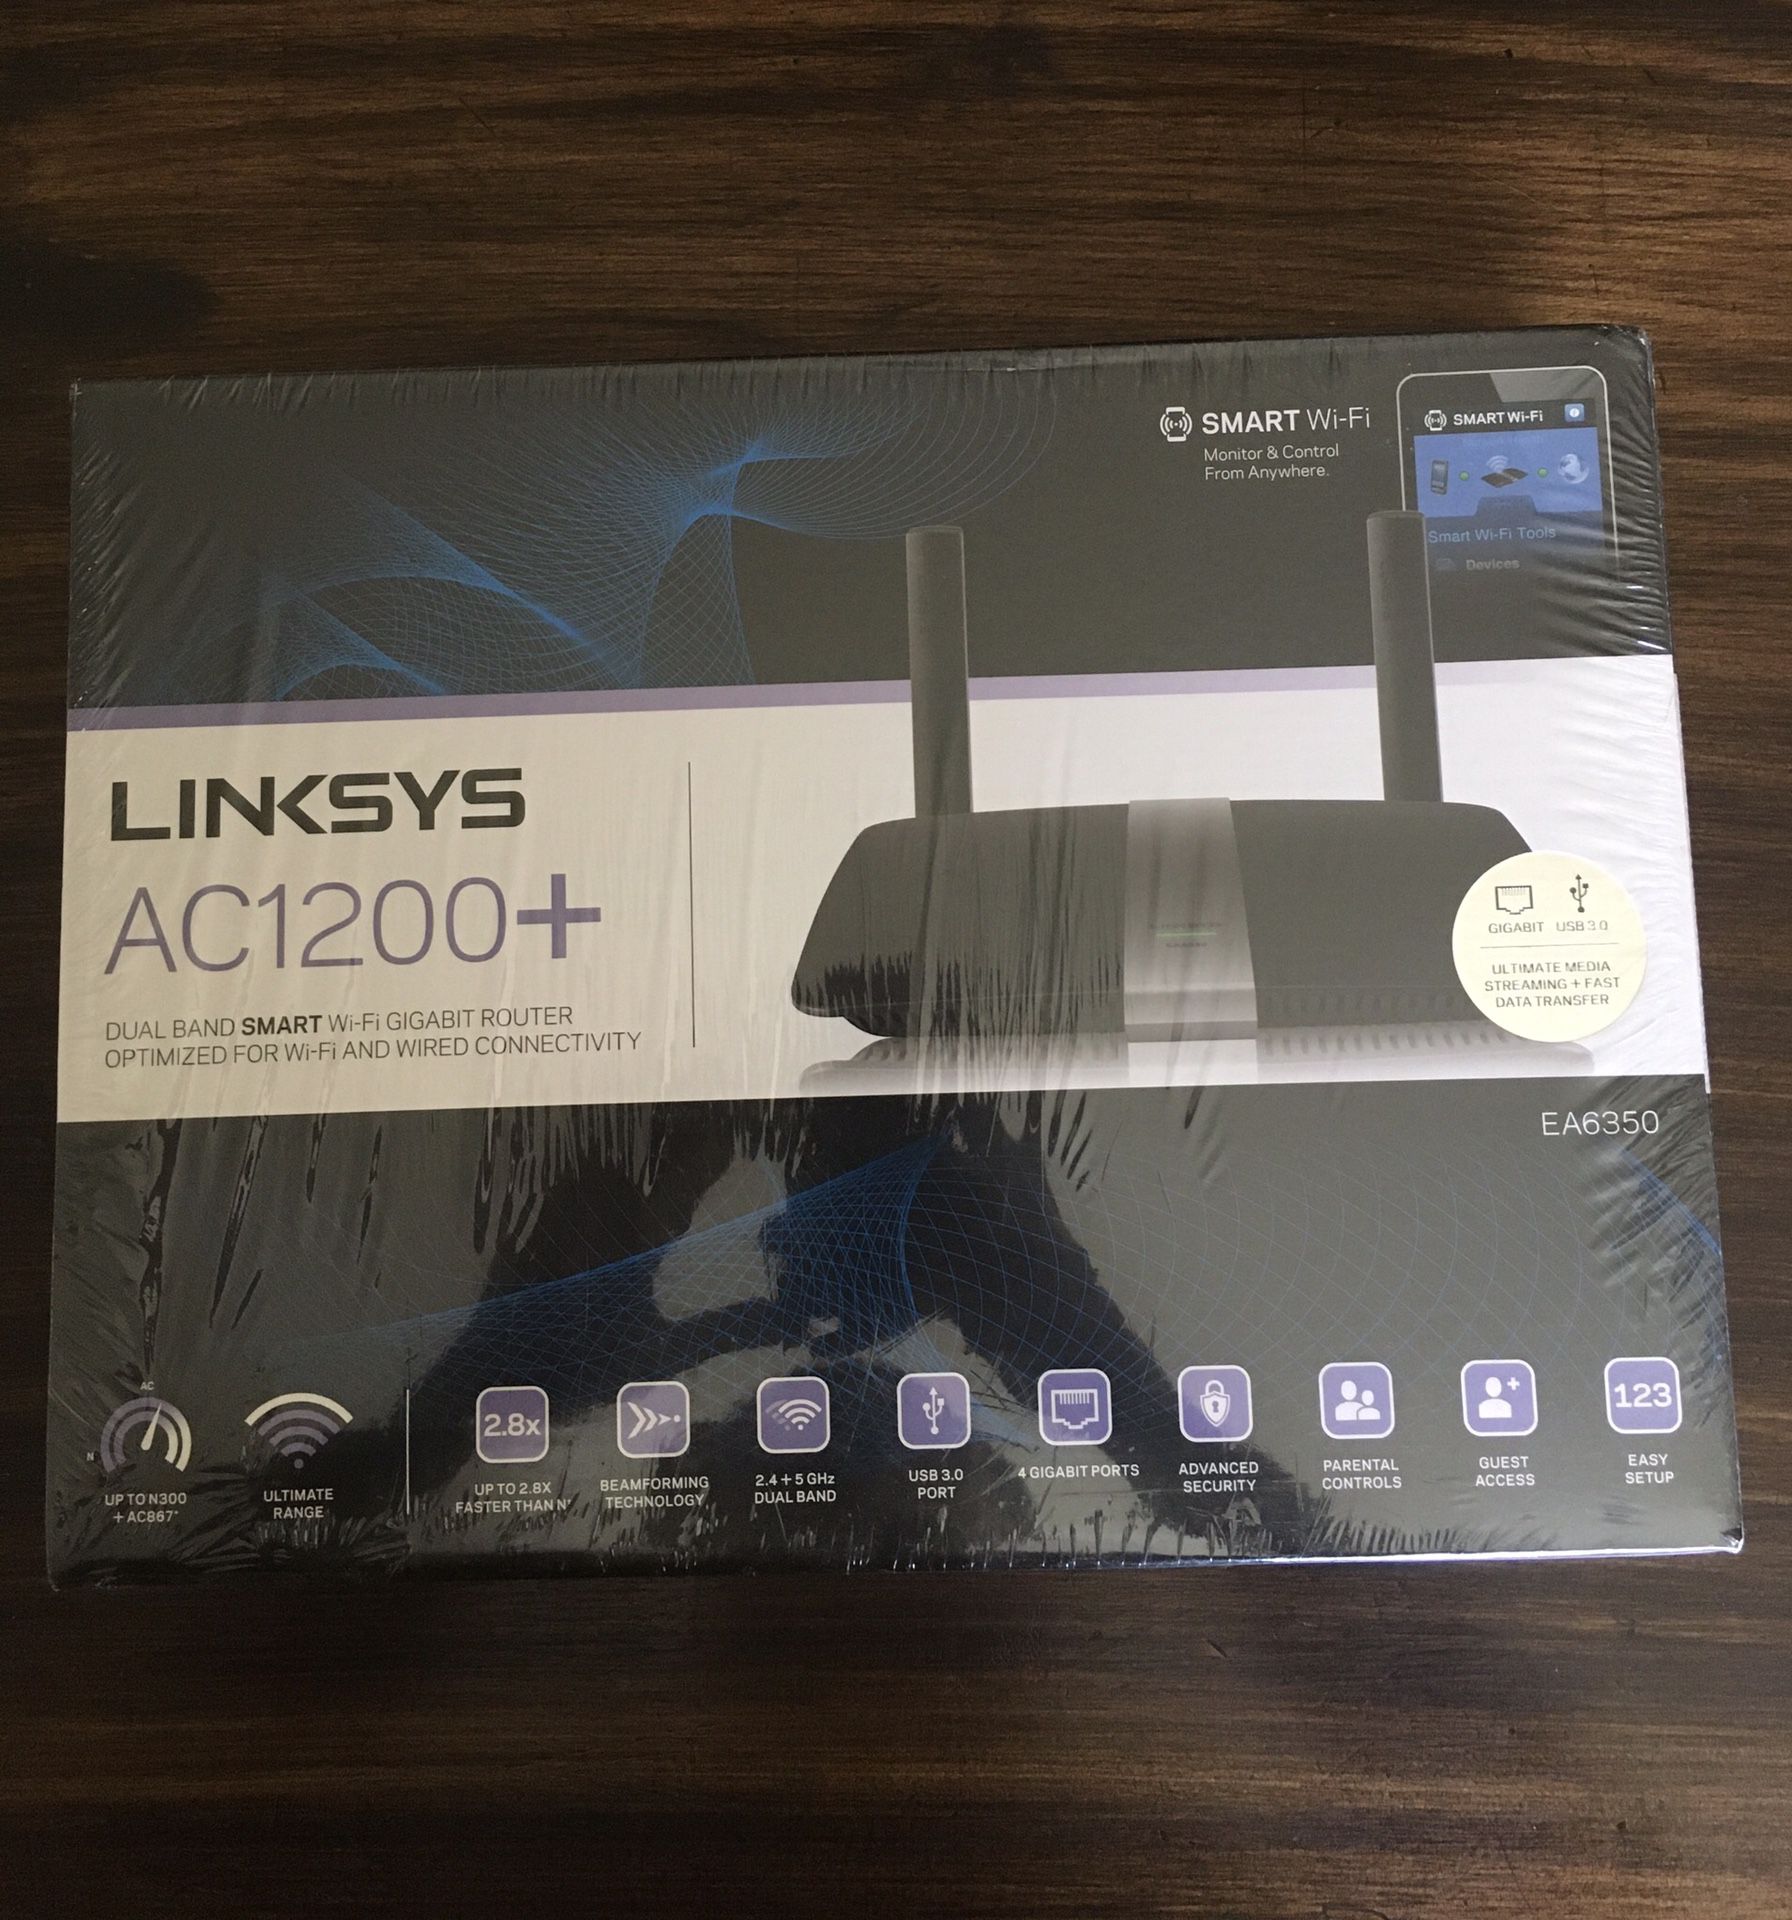 Linksys EA6350 Dual-Band WiFi Router for Home (AC1200 Fast Wireless Router)